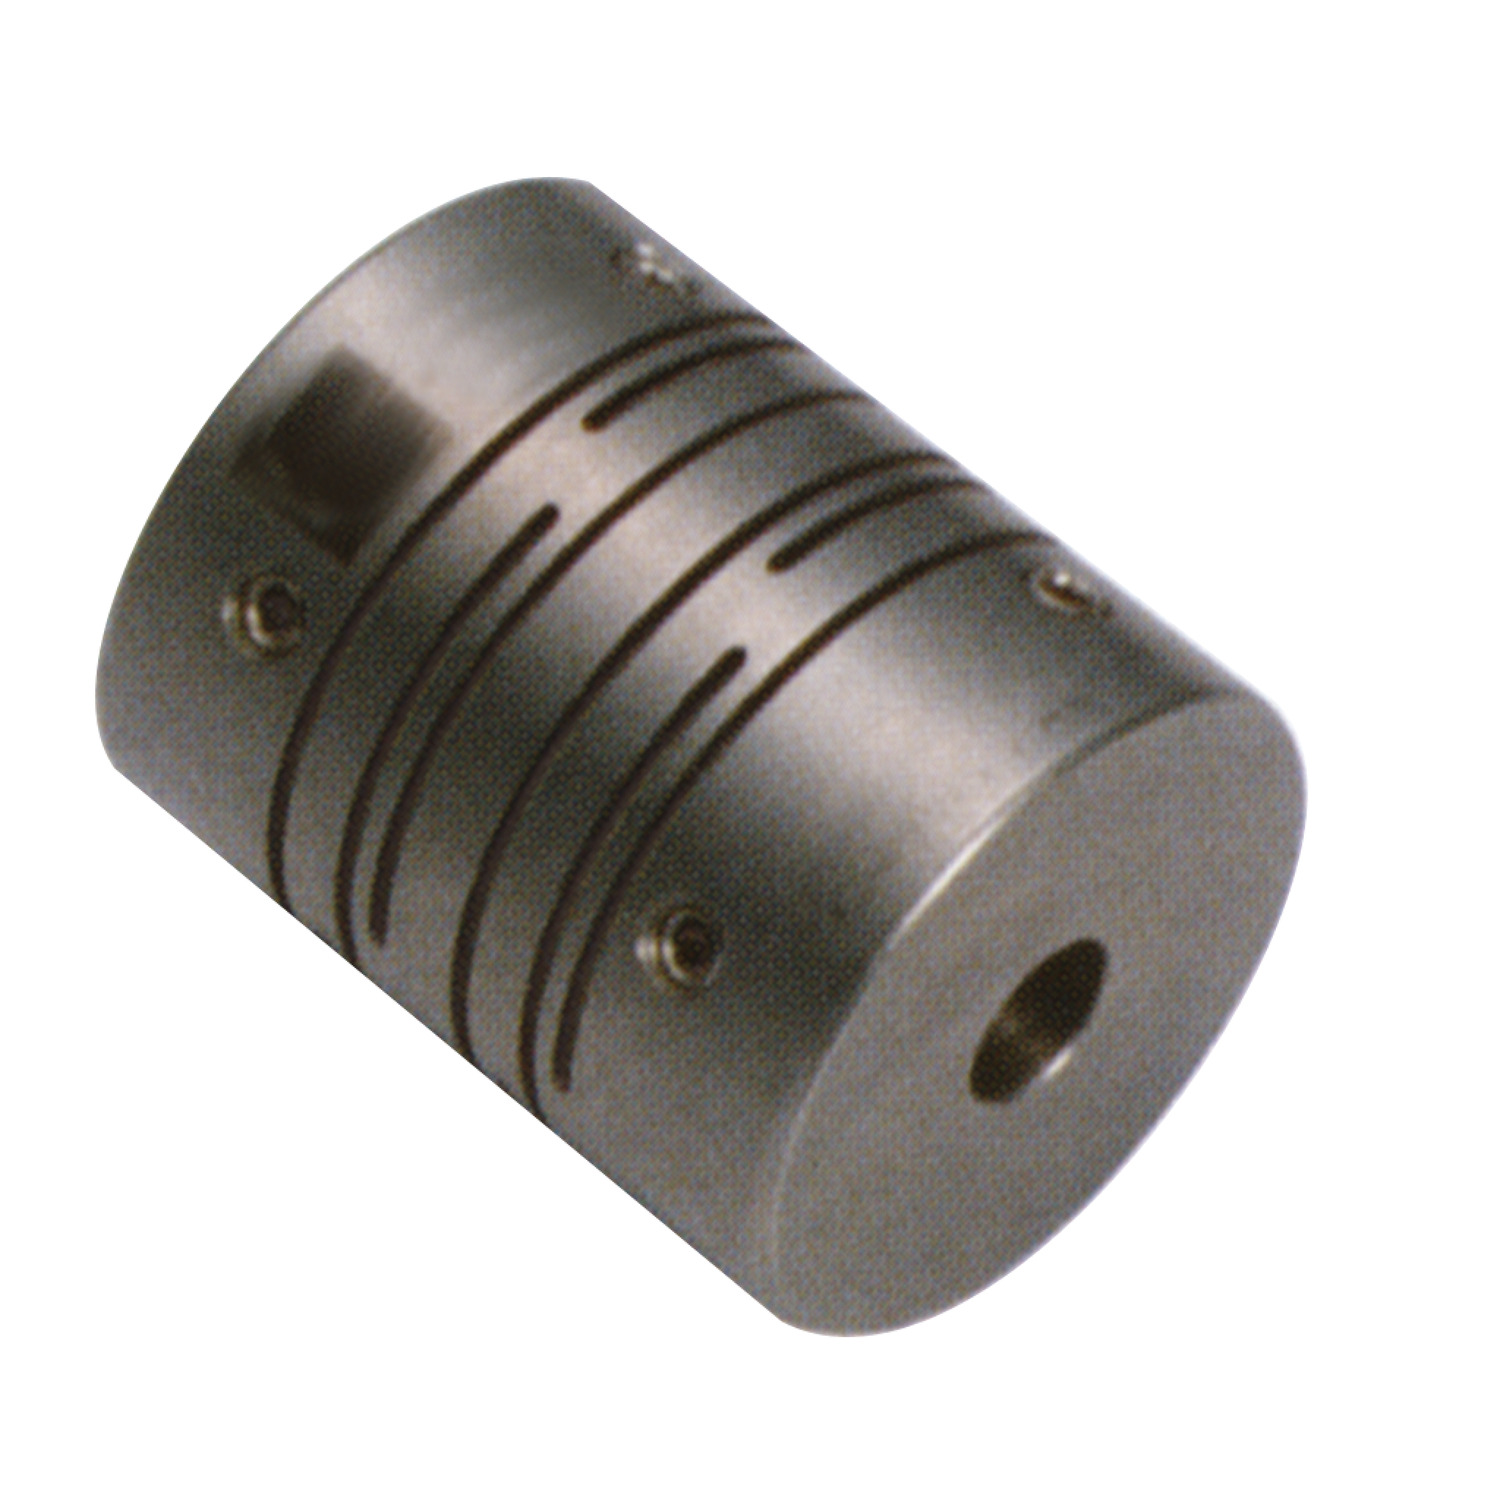 R3002.1 - Spiral Beam Coupling - Stainless Steel